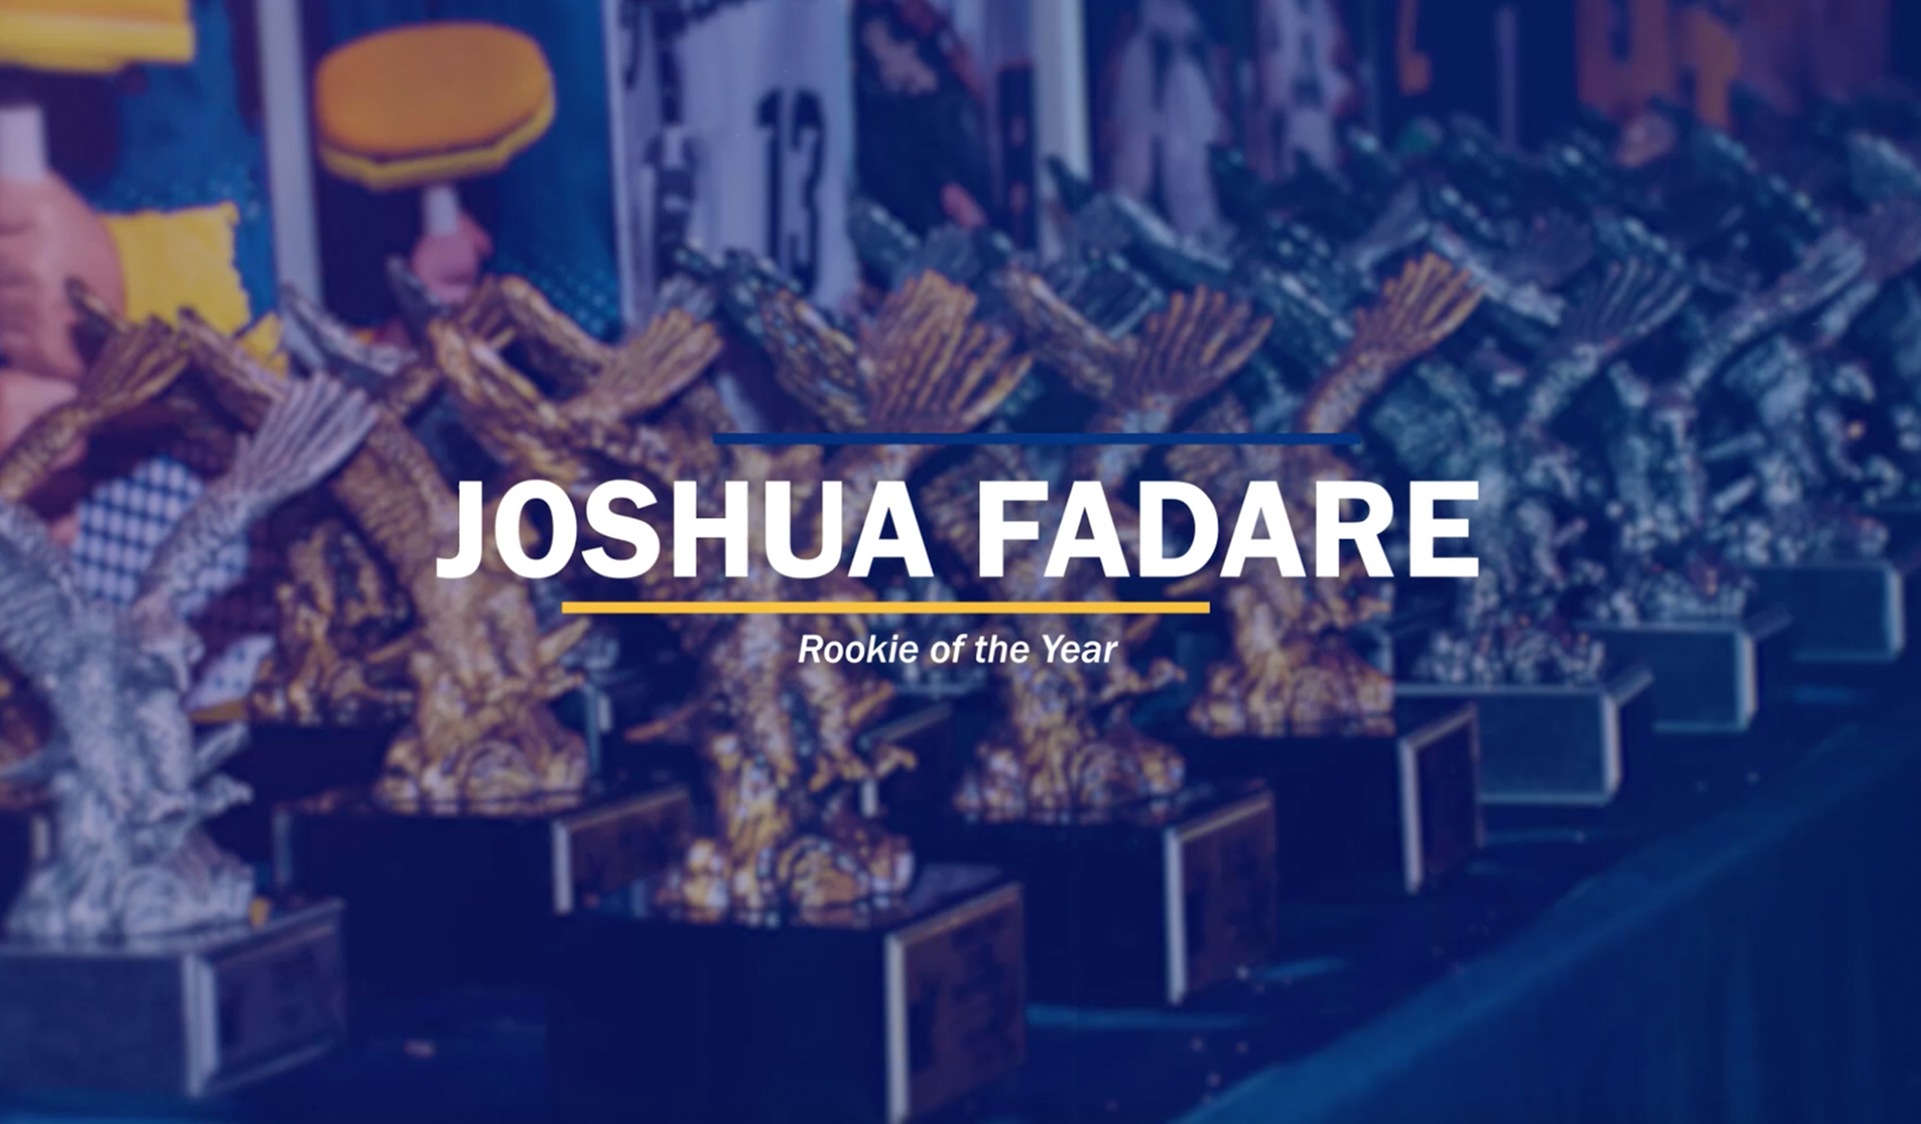 2020 Humber Male Rookie of the Year: Joshua Fadare